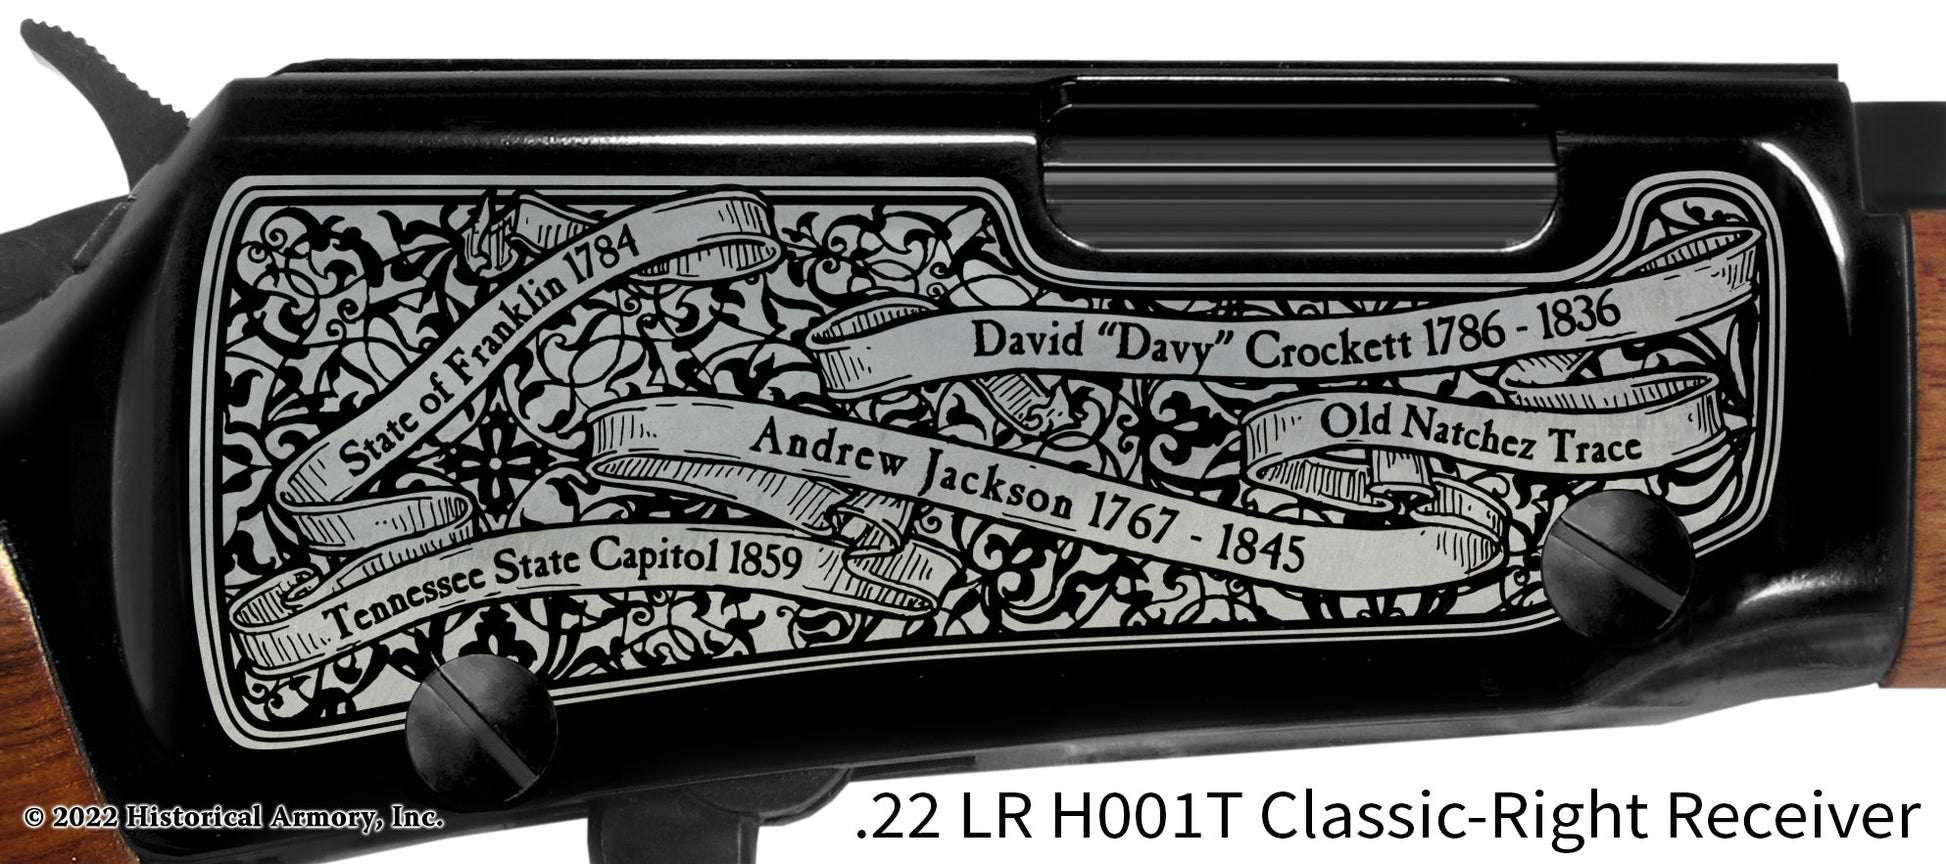 Tennessee State Pride Engraved H00T Receiver detail Henry Rifle